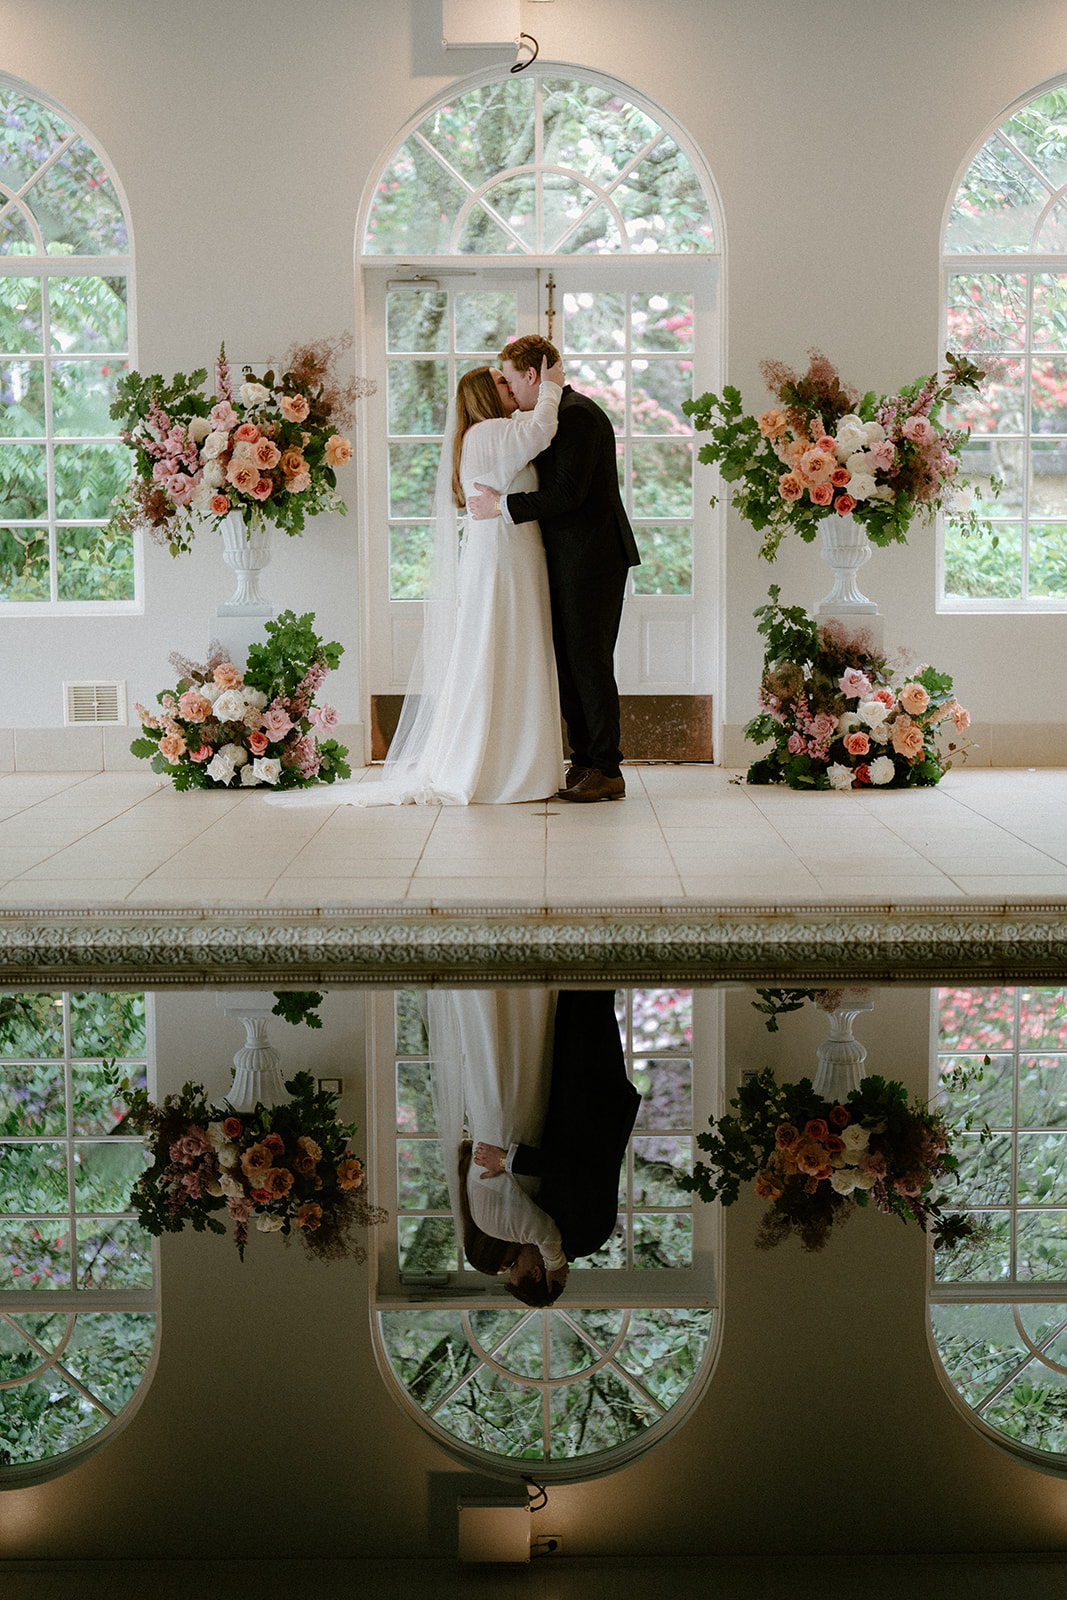 A bride and groom having their first kiss in the pool house at their Milton Park Country House wedding.